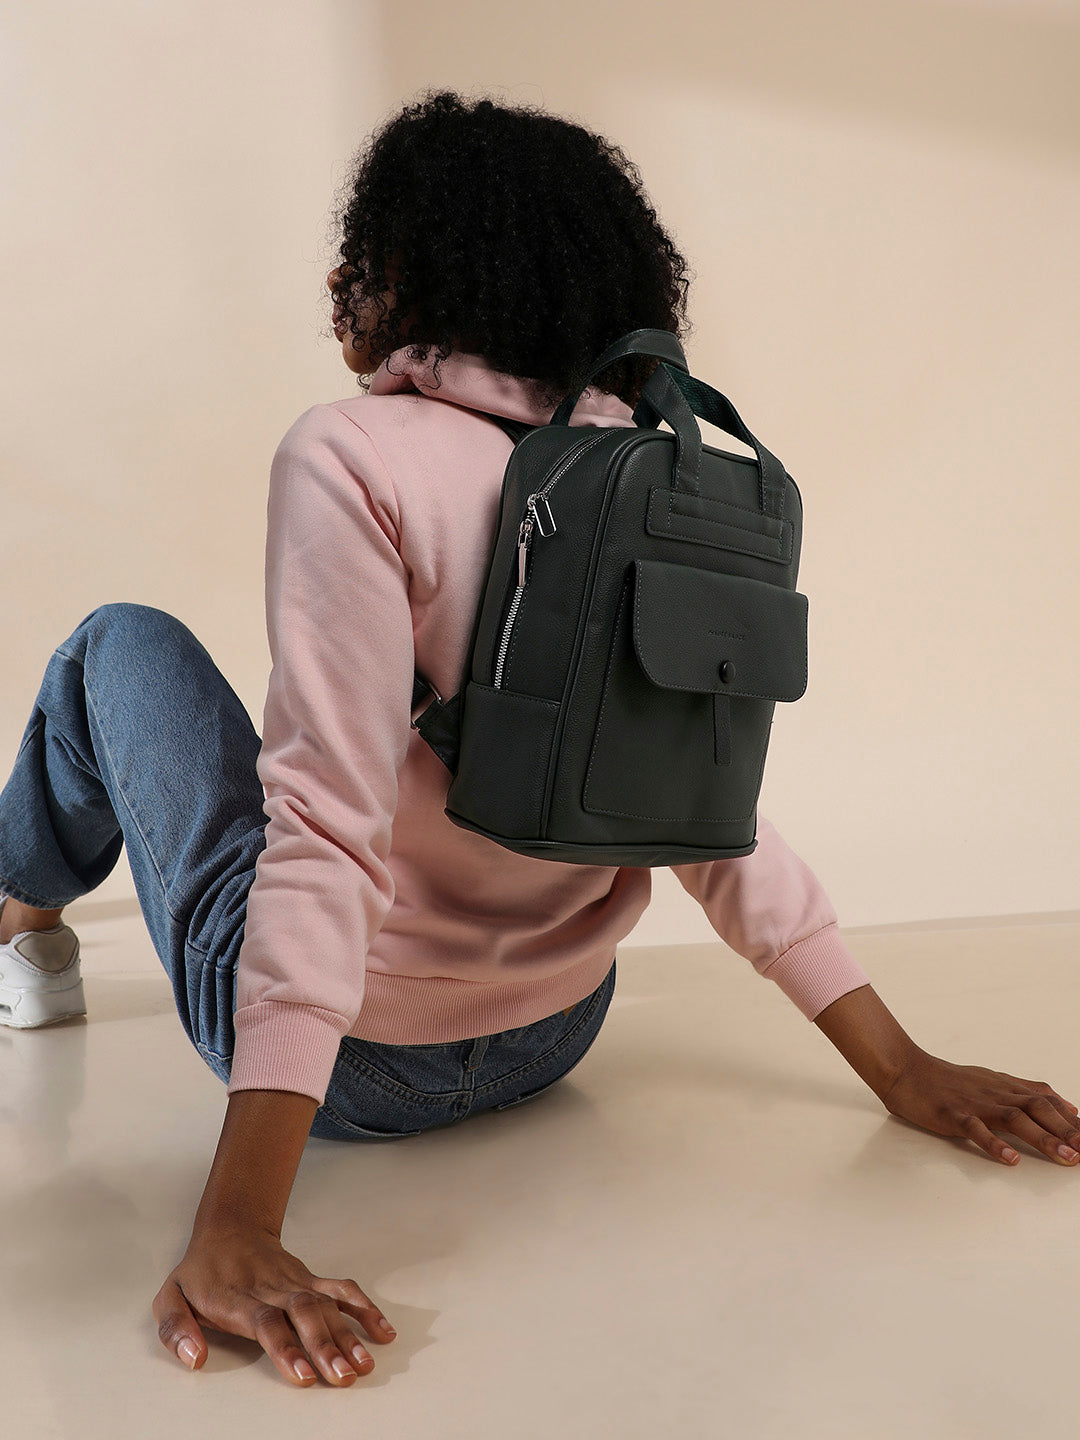 Top Handle Backpack - Forest Green